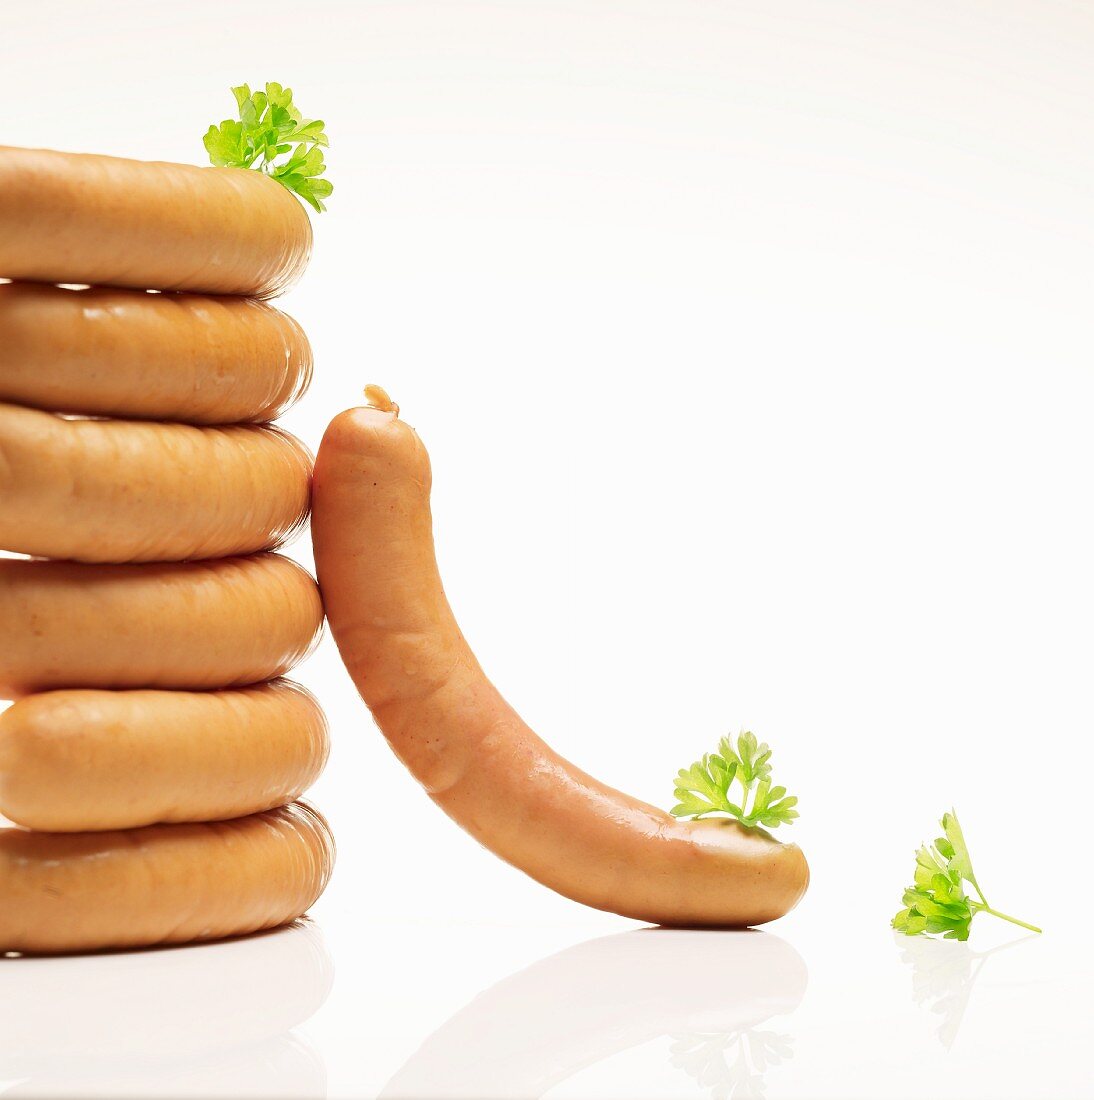 Sausages in a natural casing